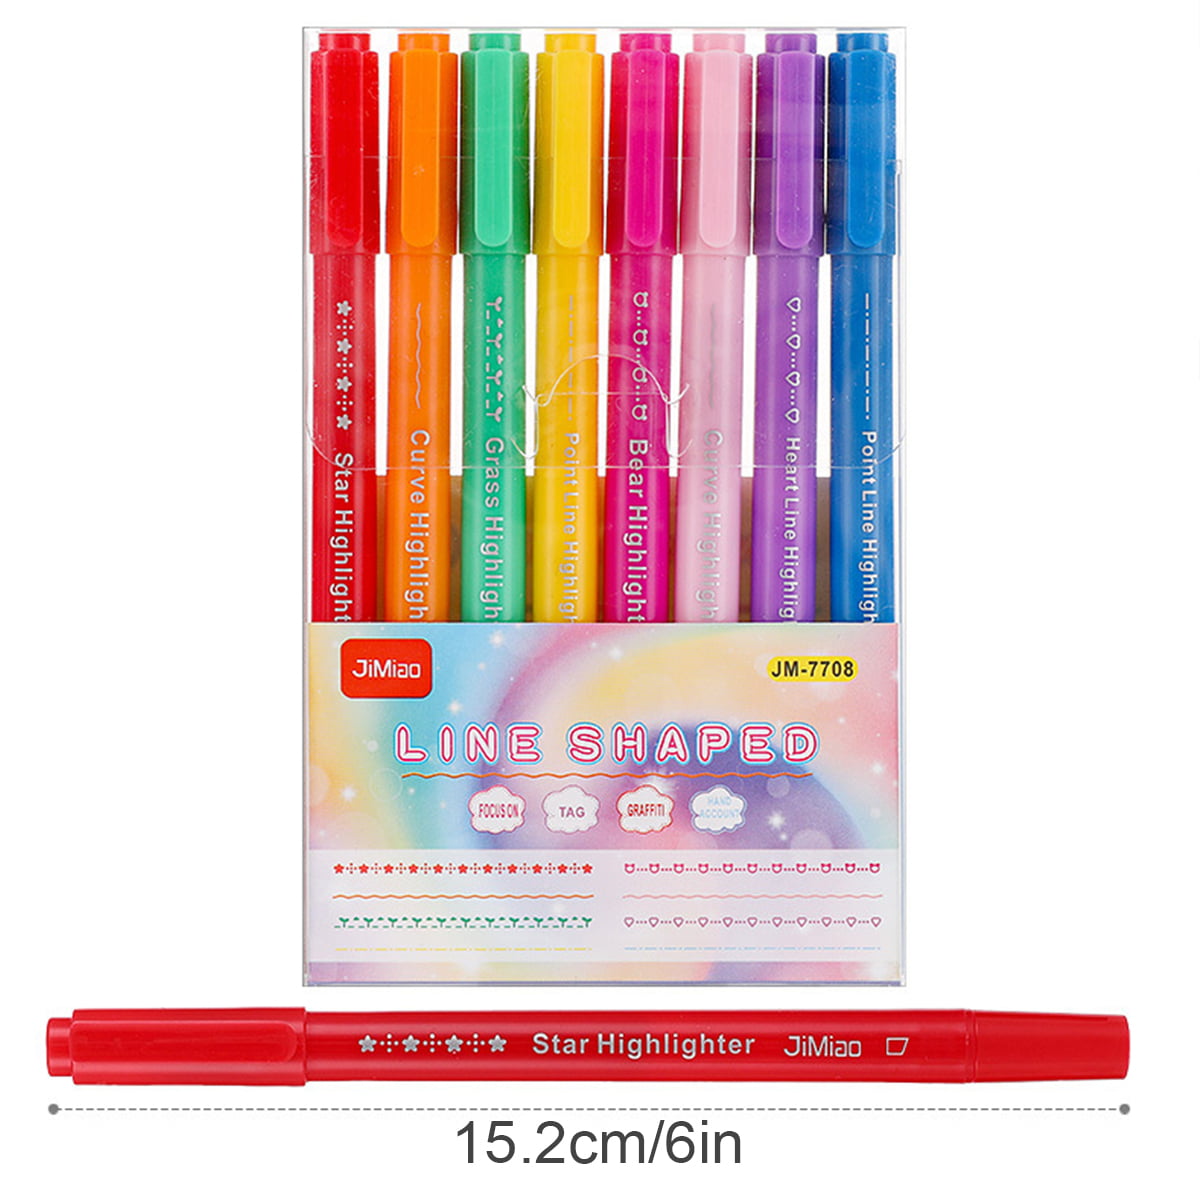 KLASSYWORLD Designer Linear Roller Curve Highlighter Pens  Set, 6 Colored - Cool Pens For Kids And Adults, Highlighter Pens For Study,  Book, Drawing, Office Use, Card-decorating (Multicolor)